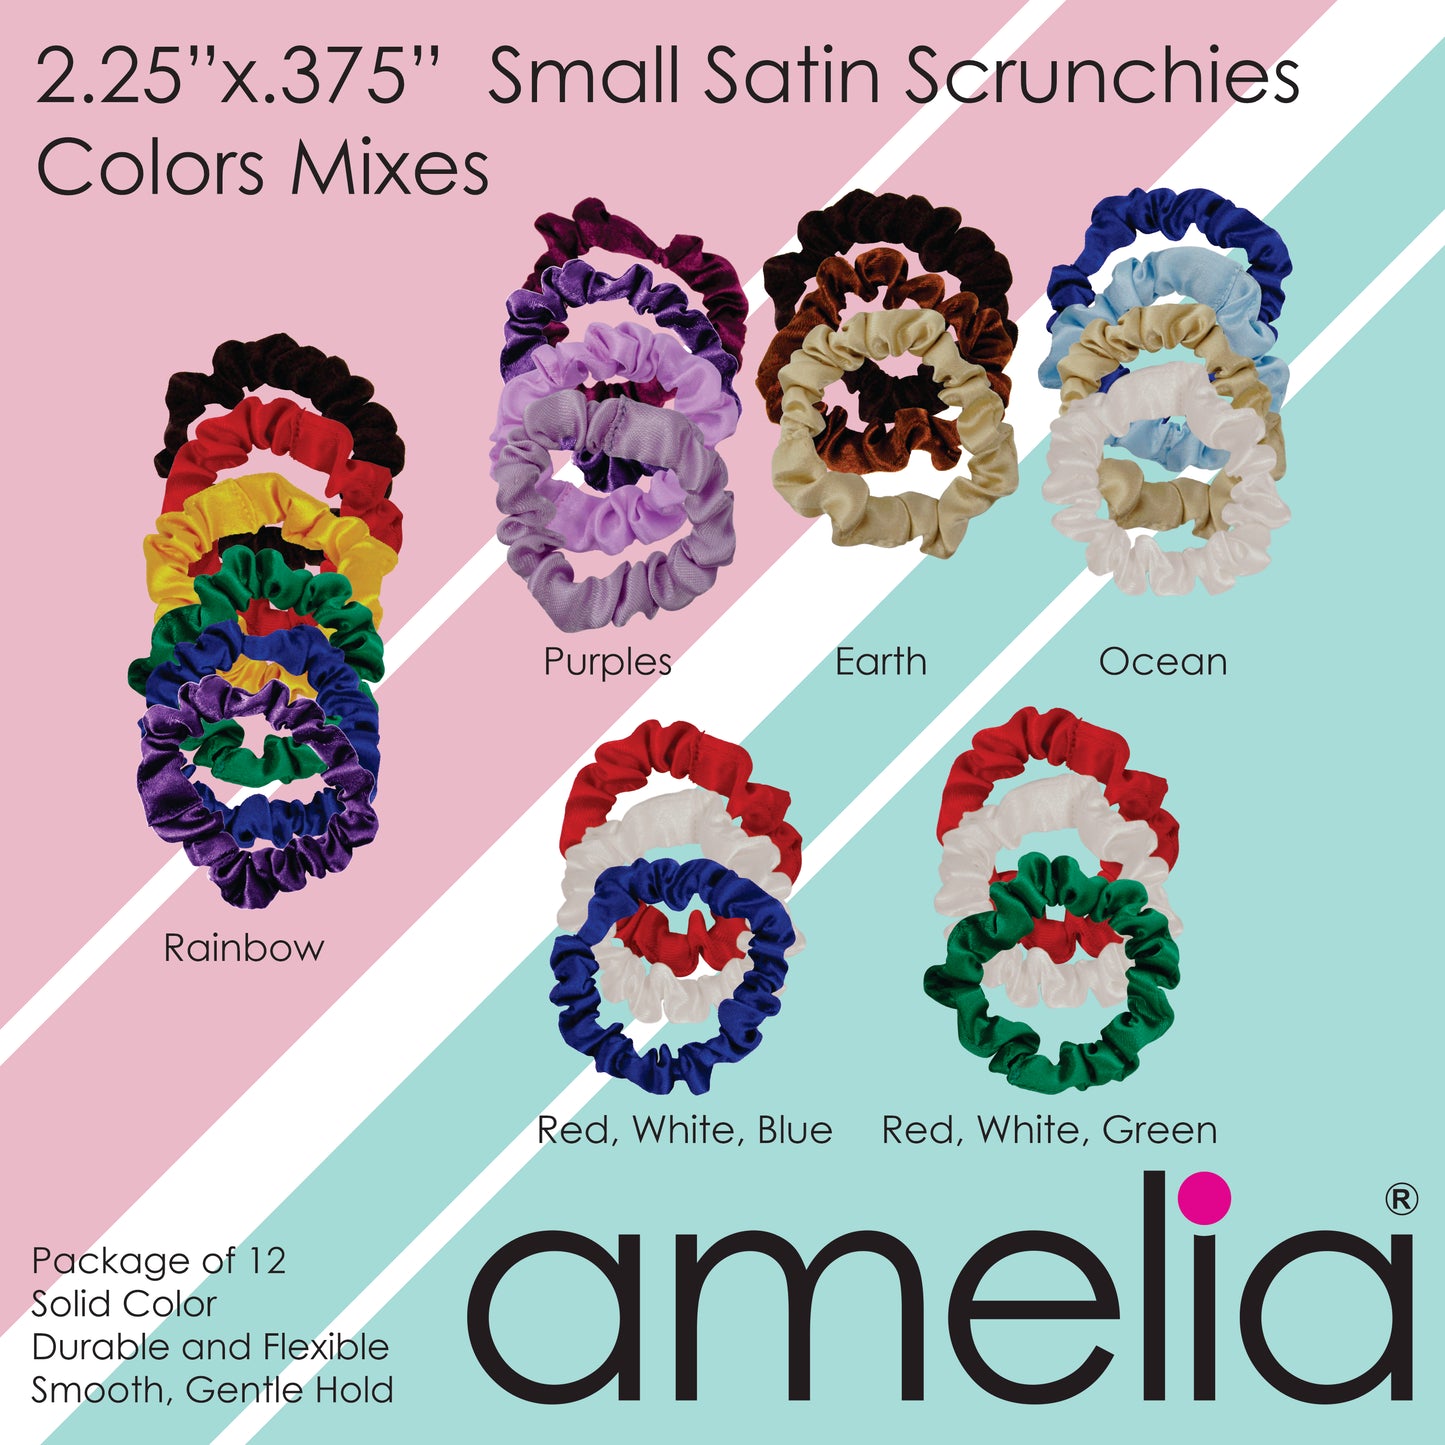 Amelia Beauty, Yellow Satin Scrunchies, 2.25in Diameter, Gentle on Hair, Strong Hold, No Snag, No Dents or Creases. 12 Pack